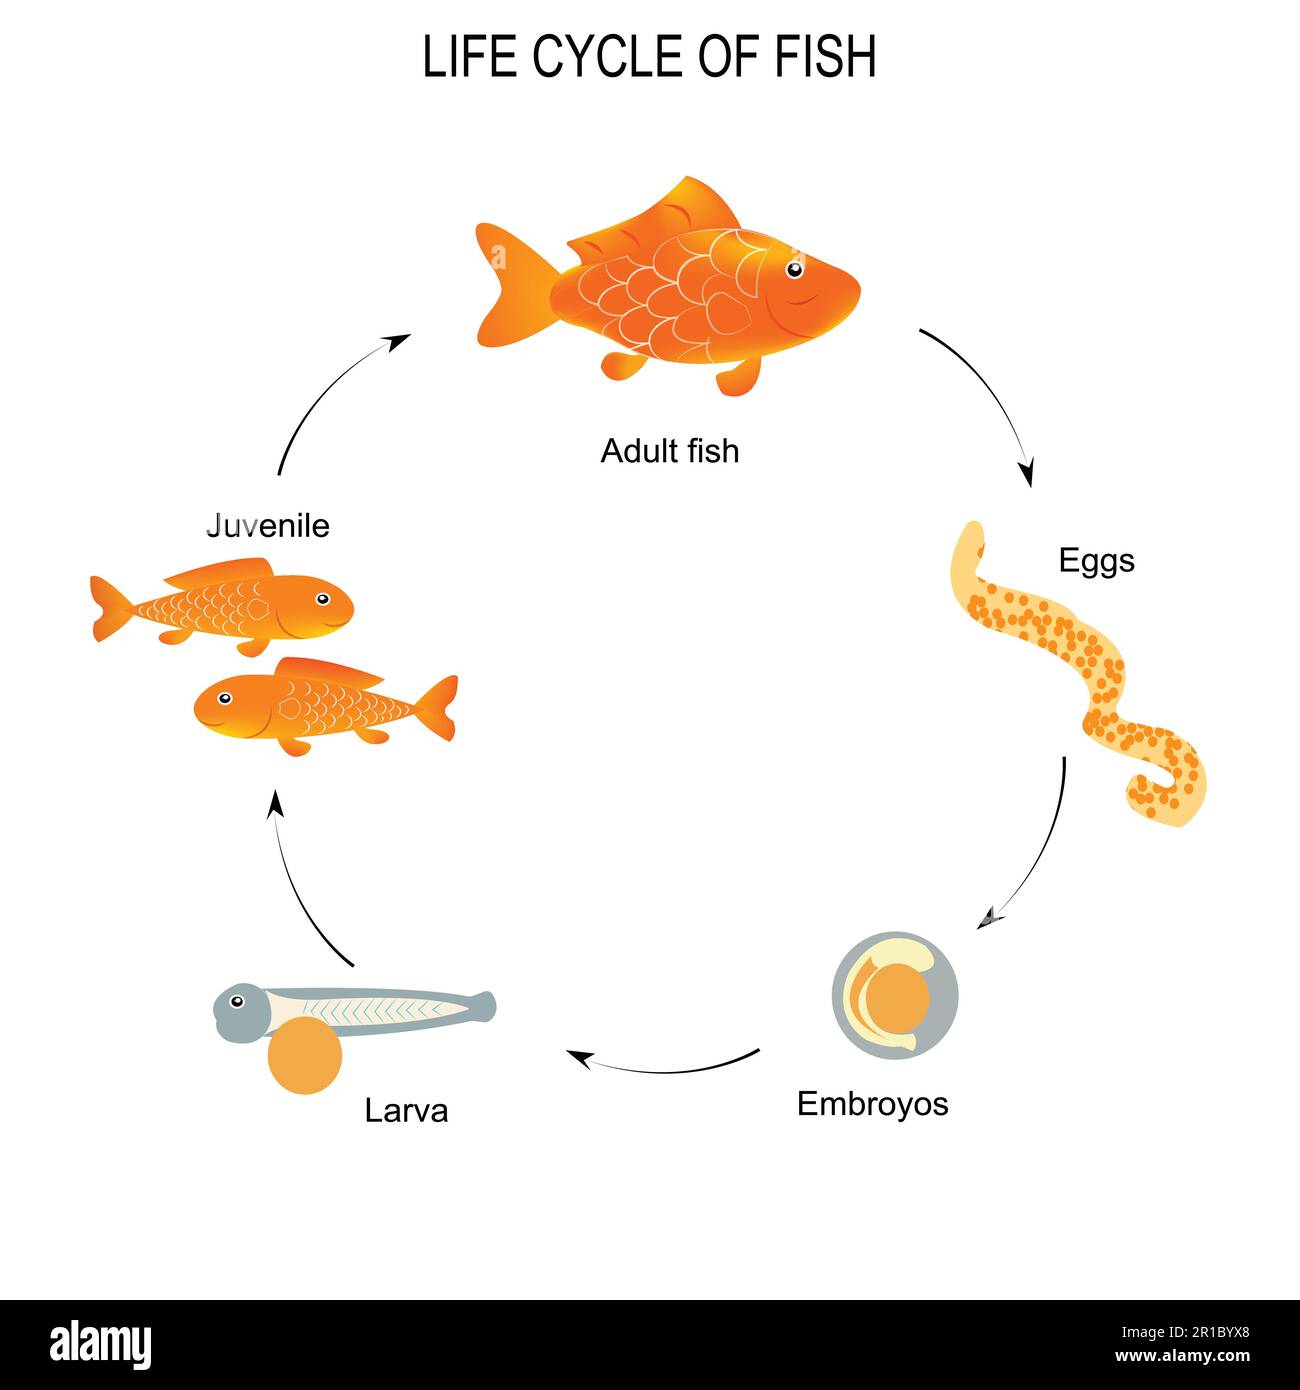 Life cycle of fish. Sequence of stages of development of fish from egg to adult animal. Life science and educational image of fish lifecycle. Stock Vector